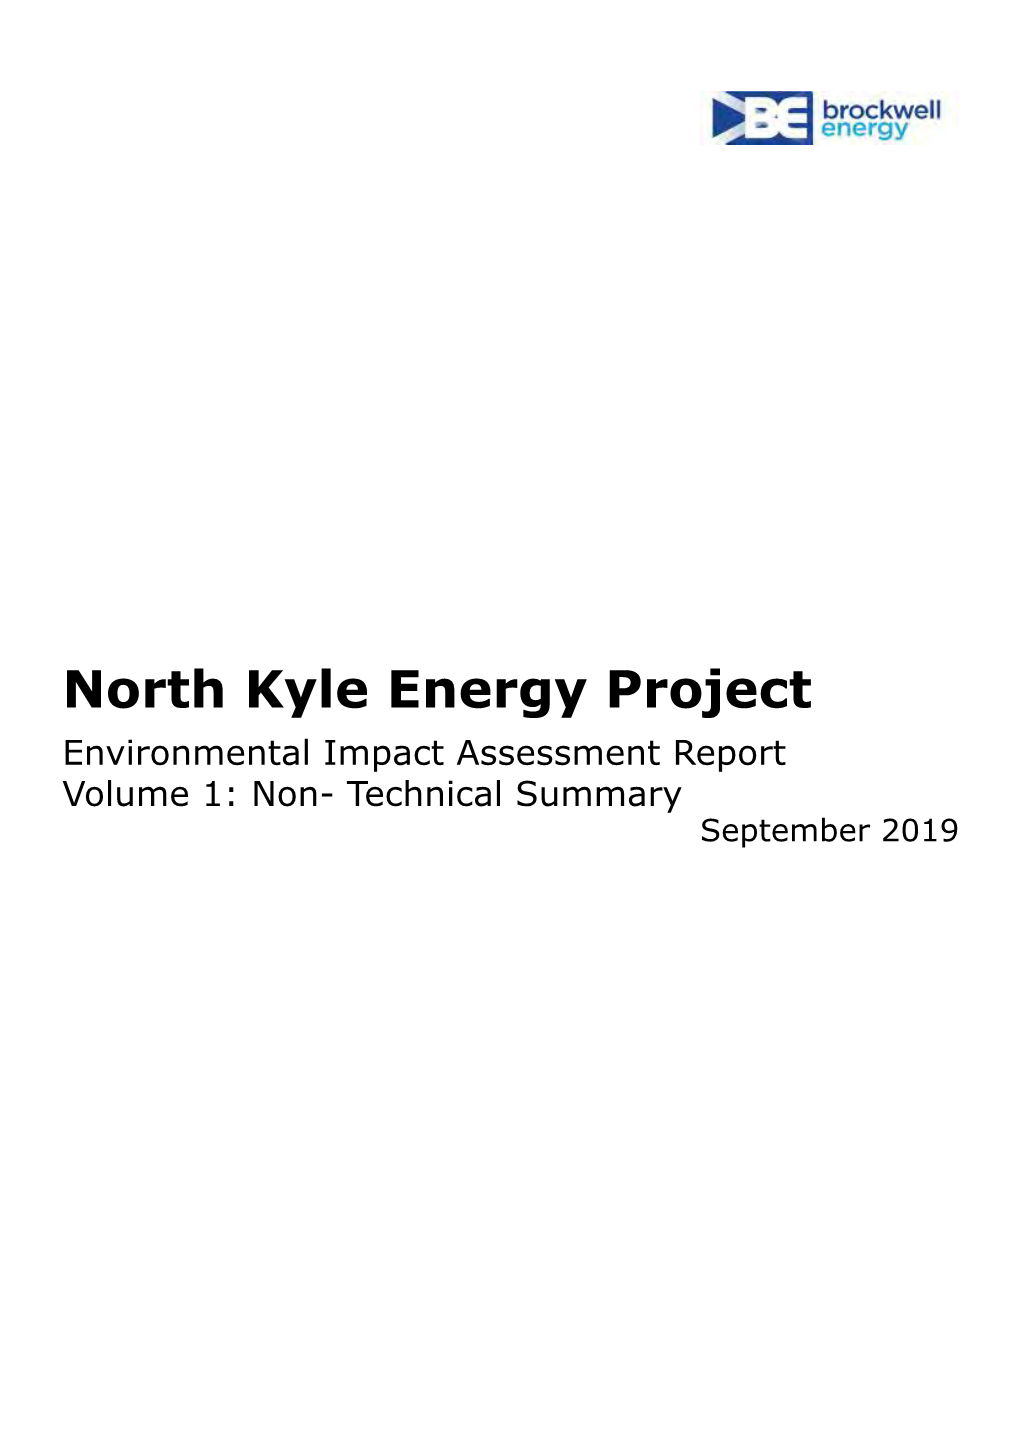 North Kyle Energy Project Environmental Impact Assessment Report Volume 1: Non- Technical Summary September 2019